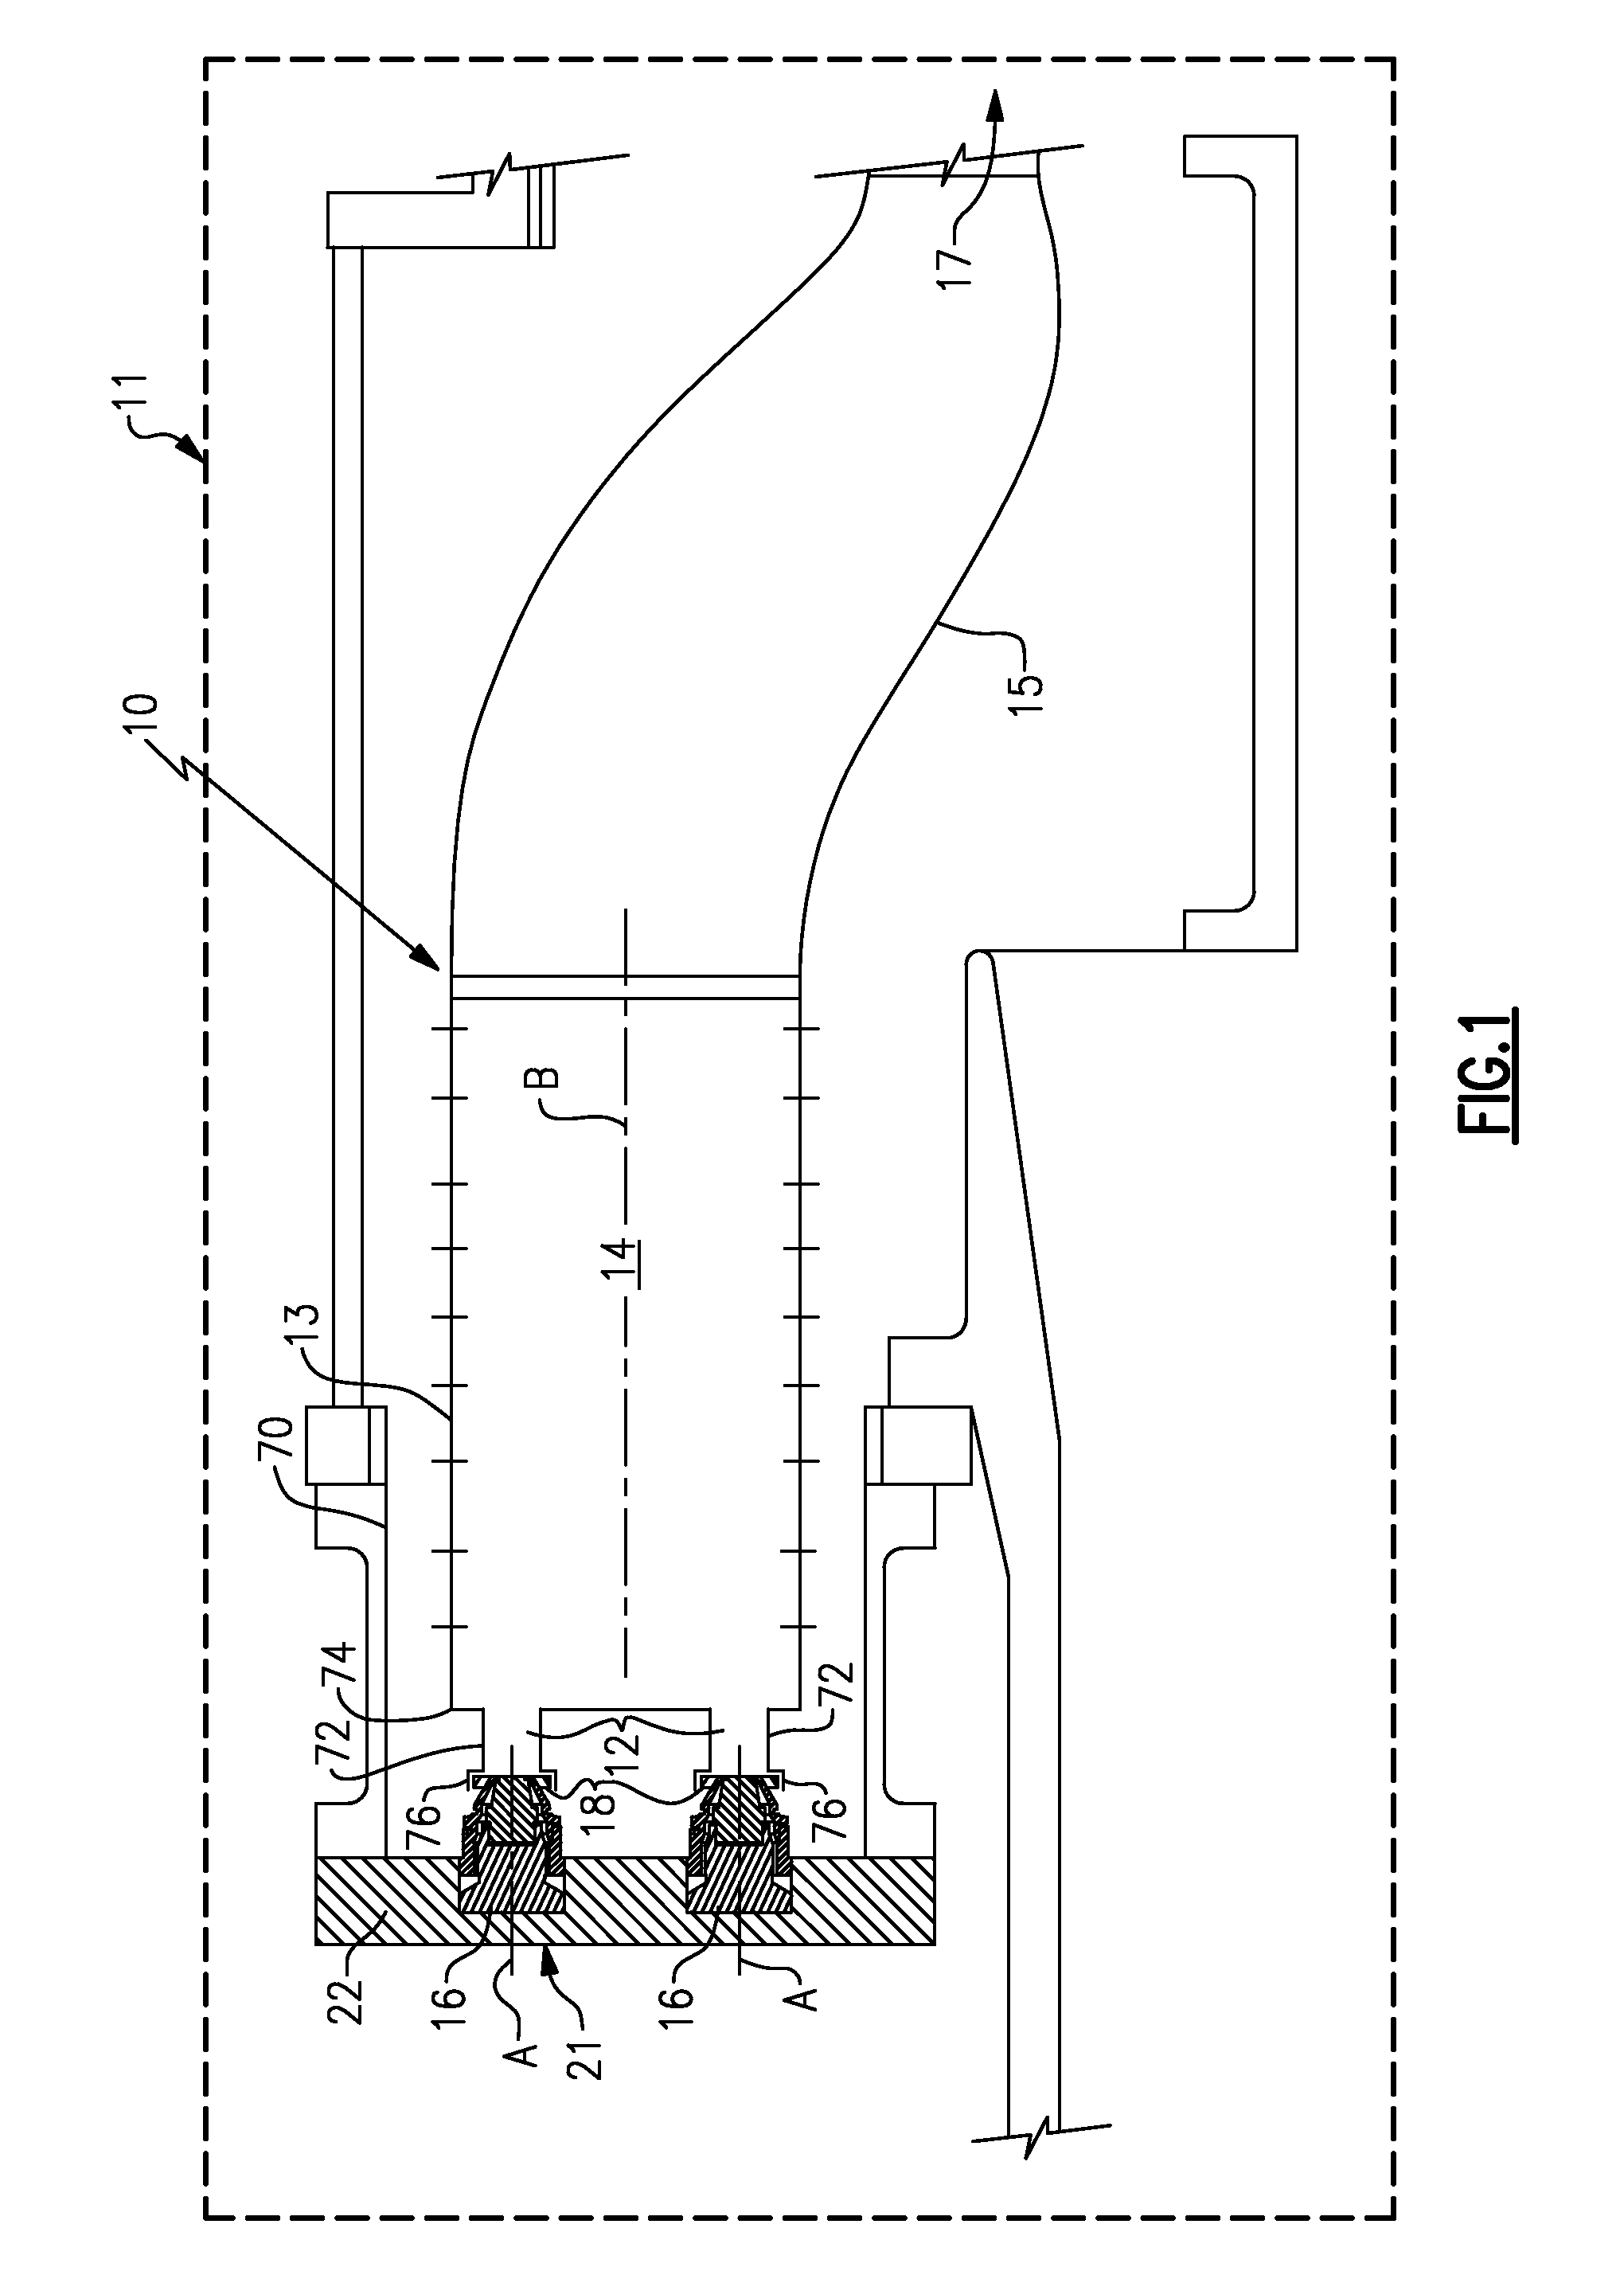 Fuel delivery system for a turbine engine